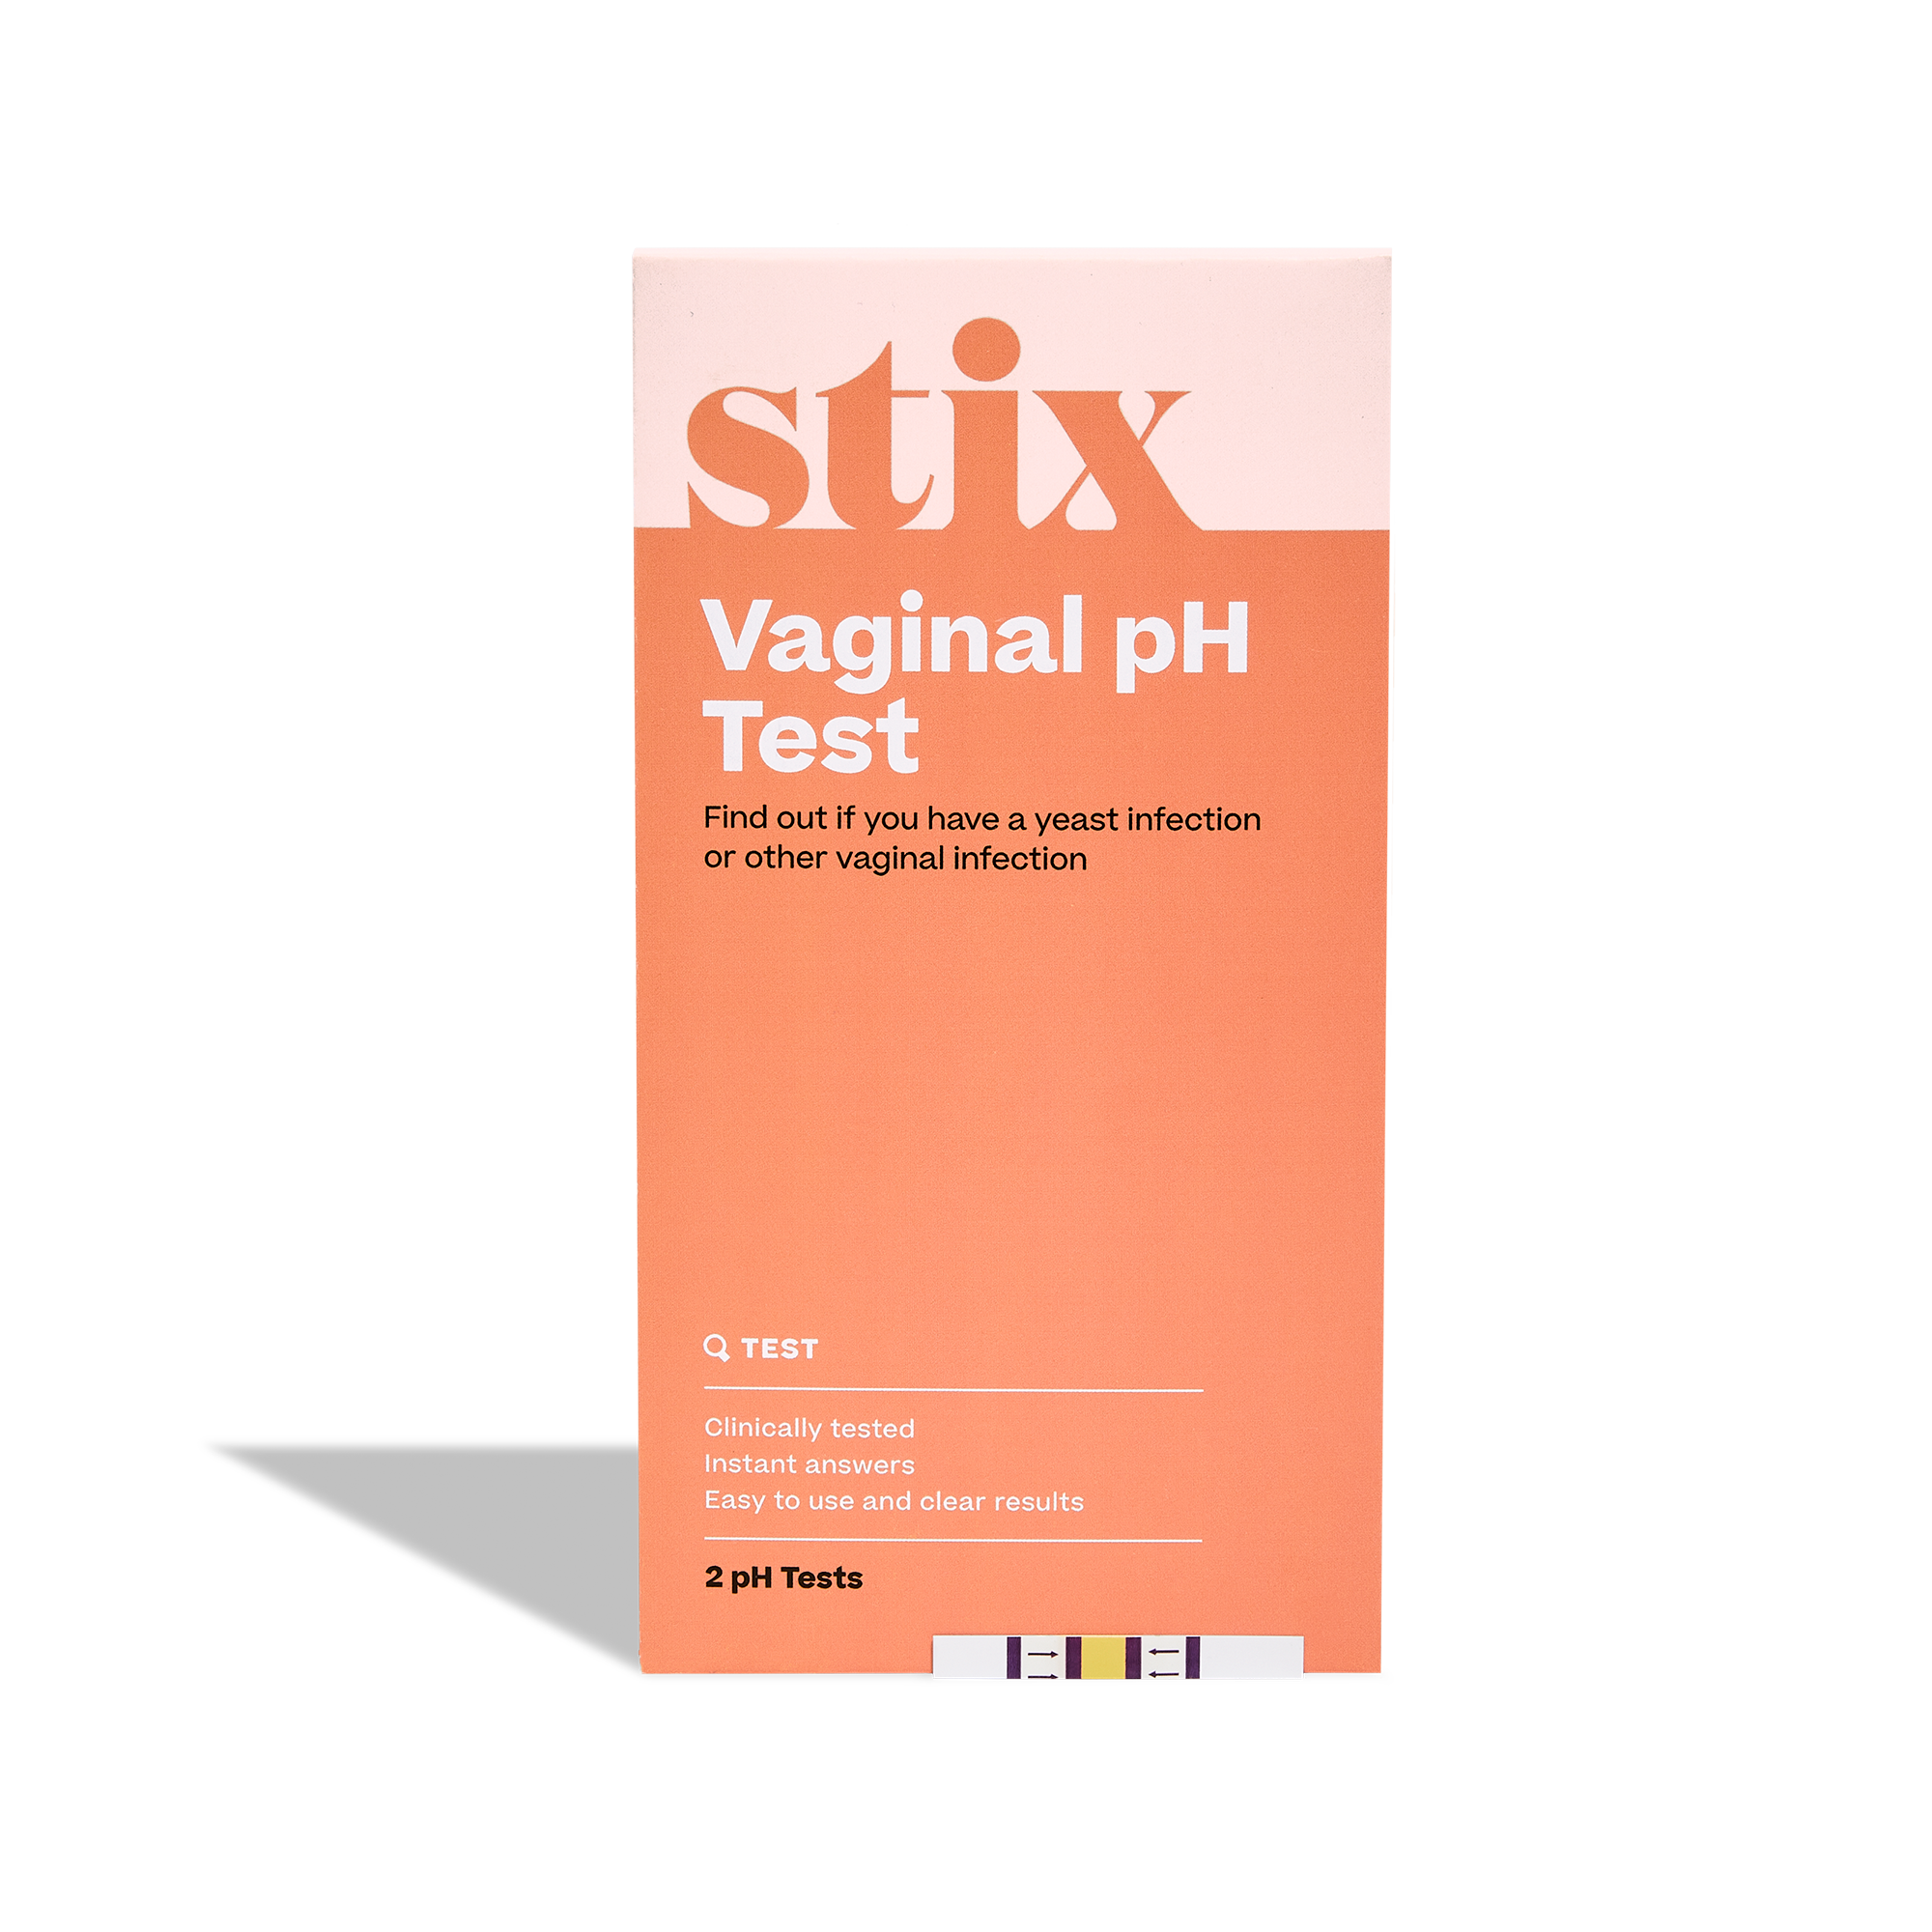 Stix: Vaginal pH Test for Yeast Infections